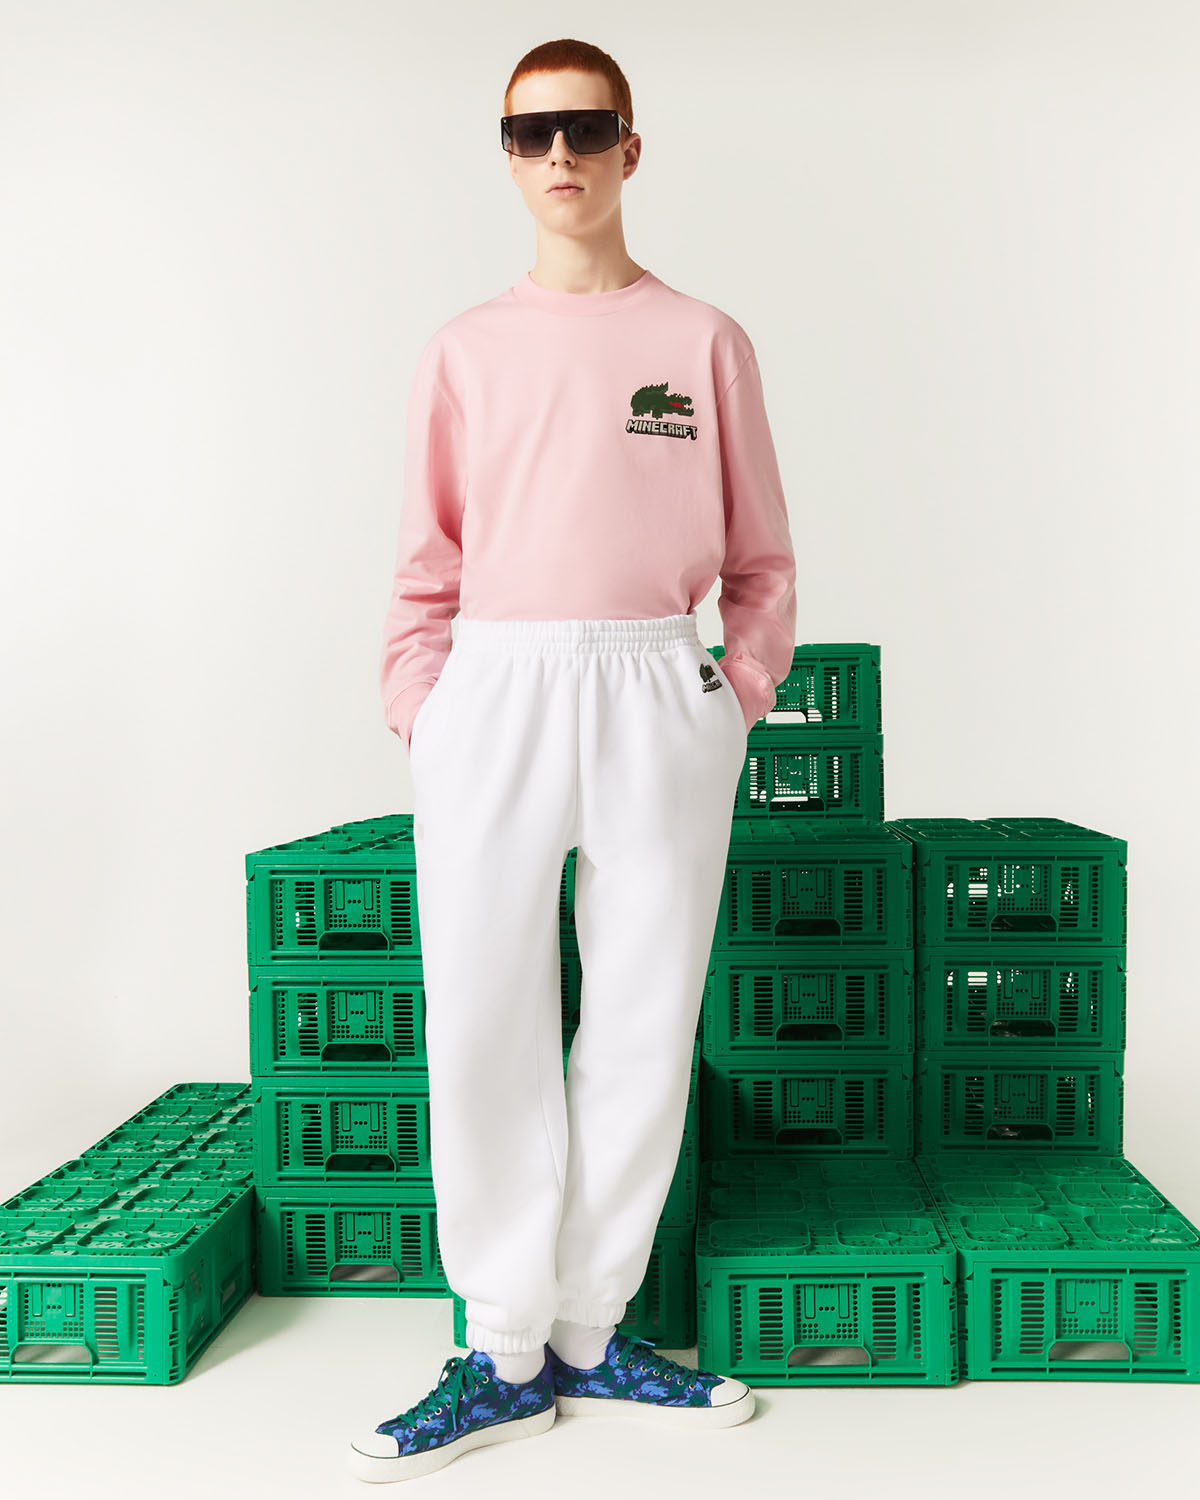 Lacoste Launched a Minecraft World & Collection